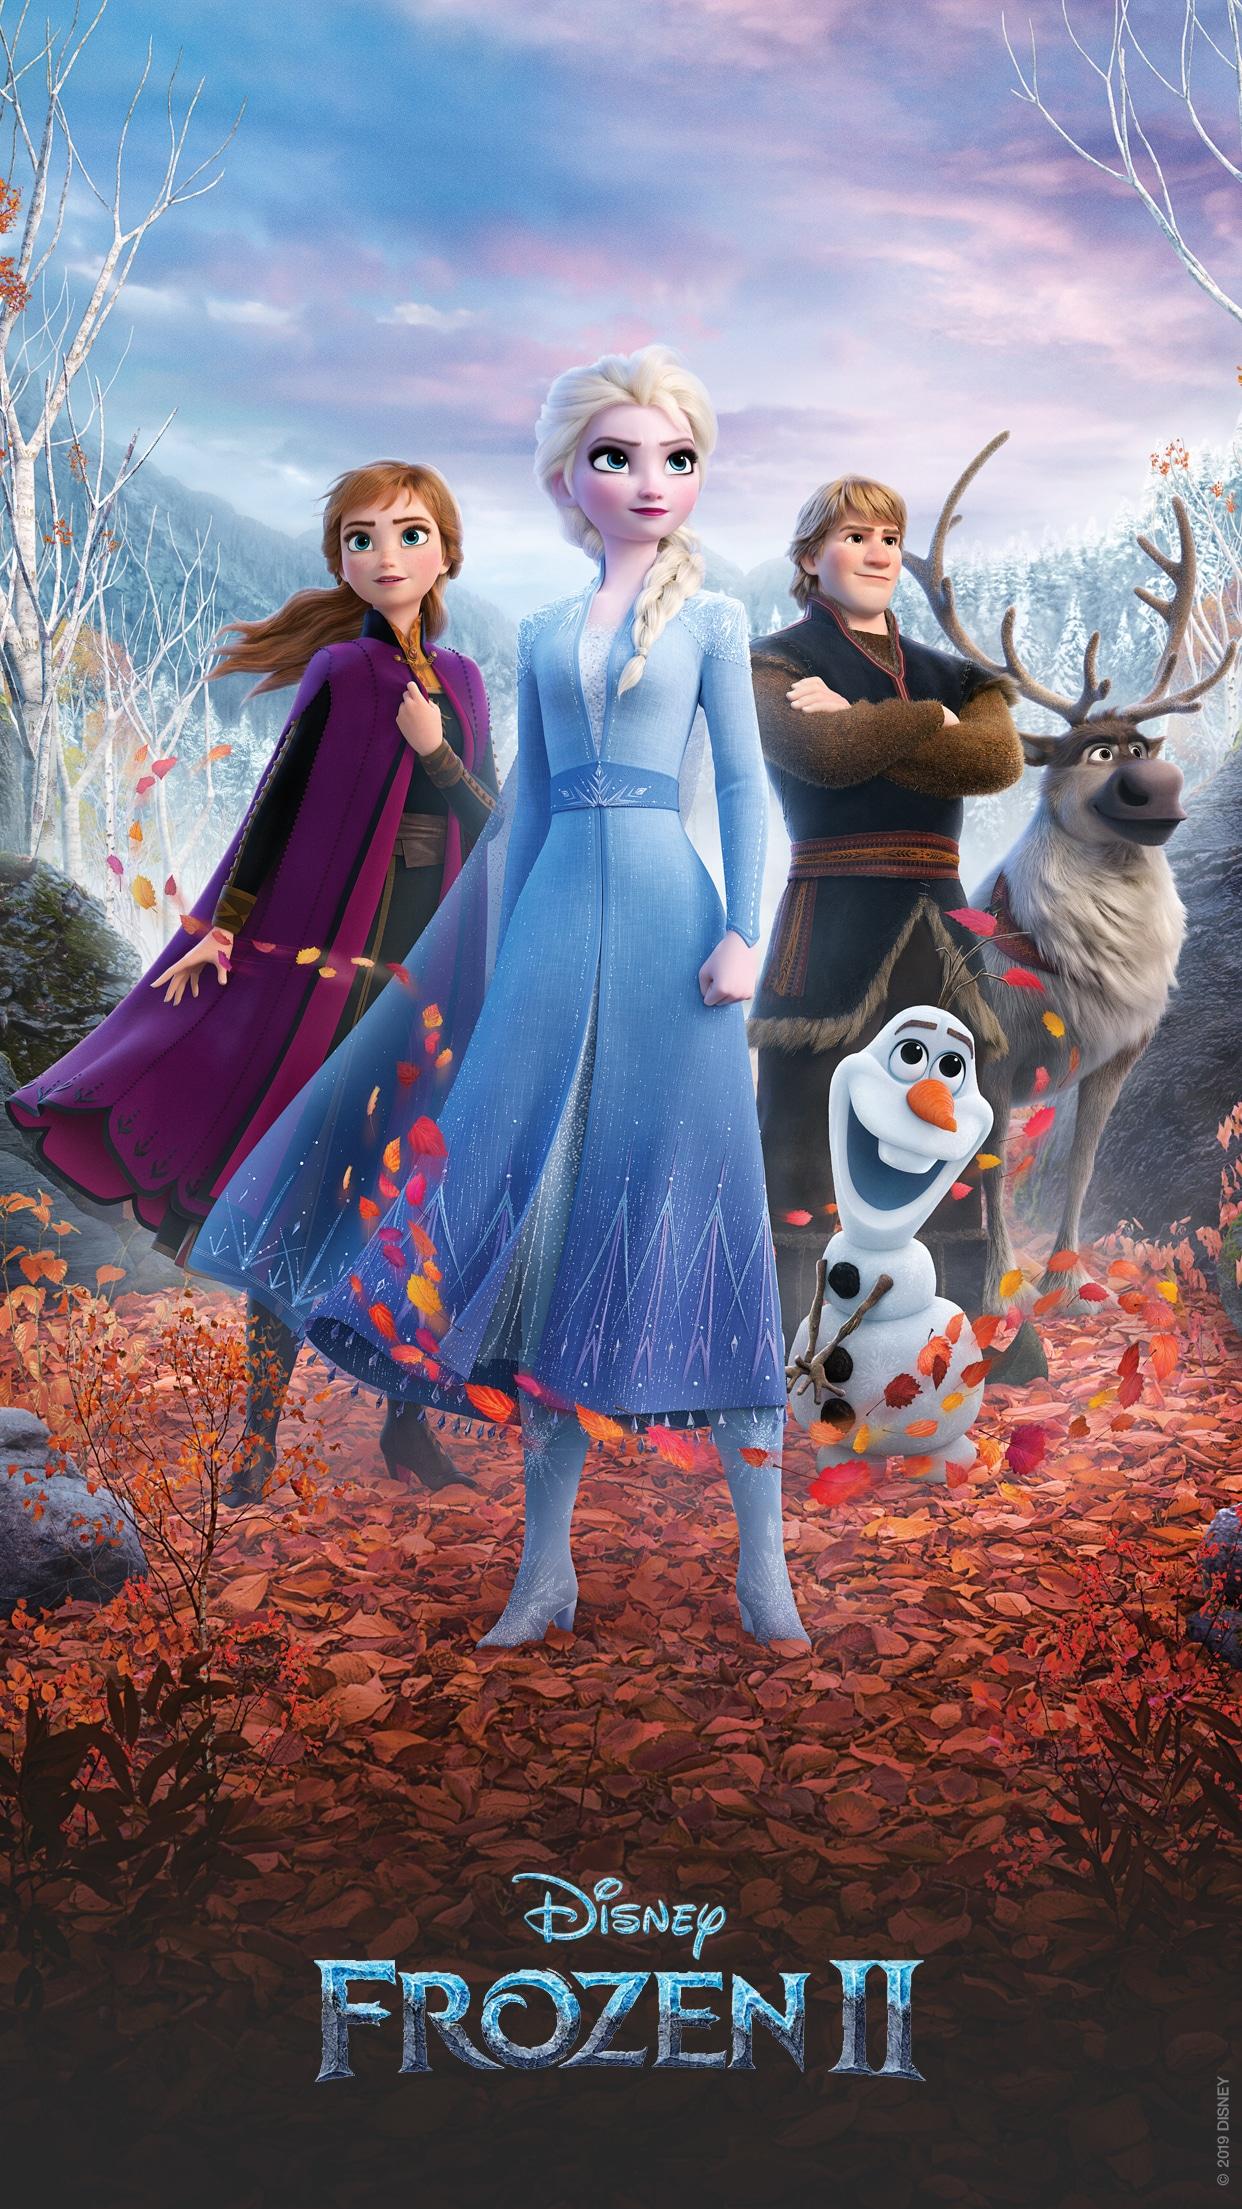 These Disney's Frozen 2 Mobile Wallpaper Will Put You In A Mood For Adventure